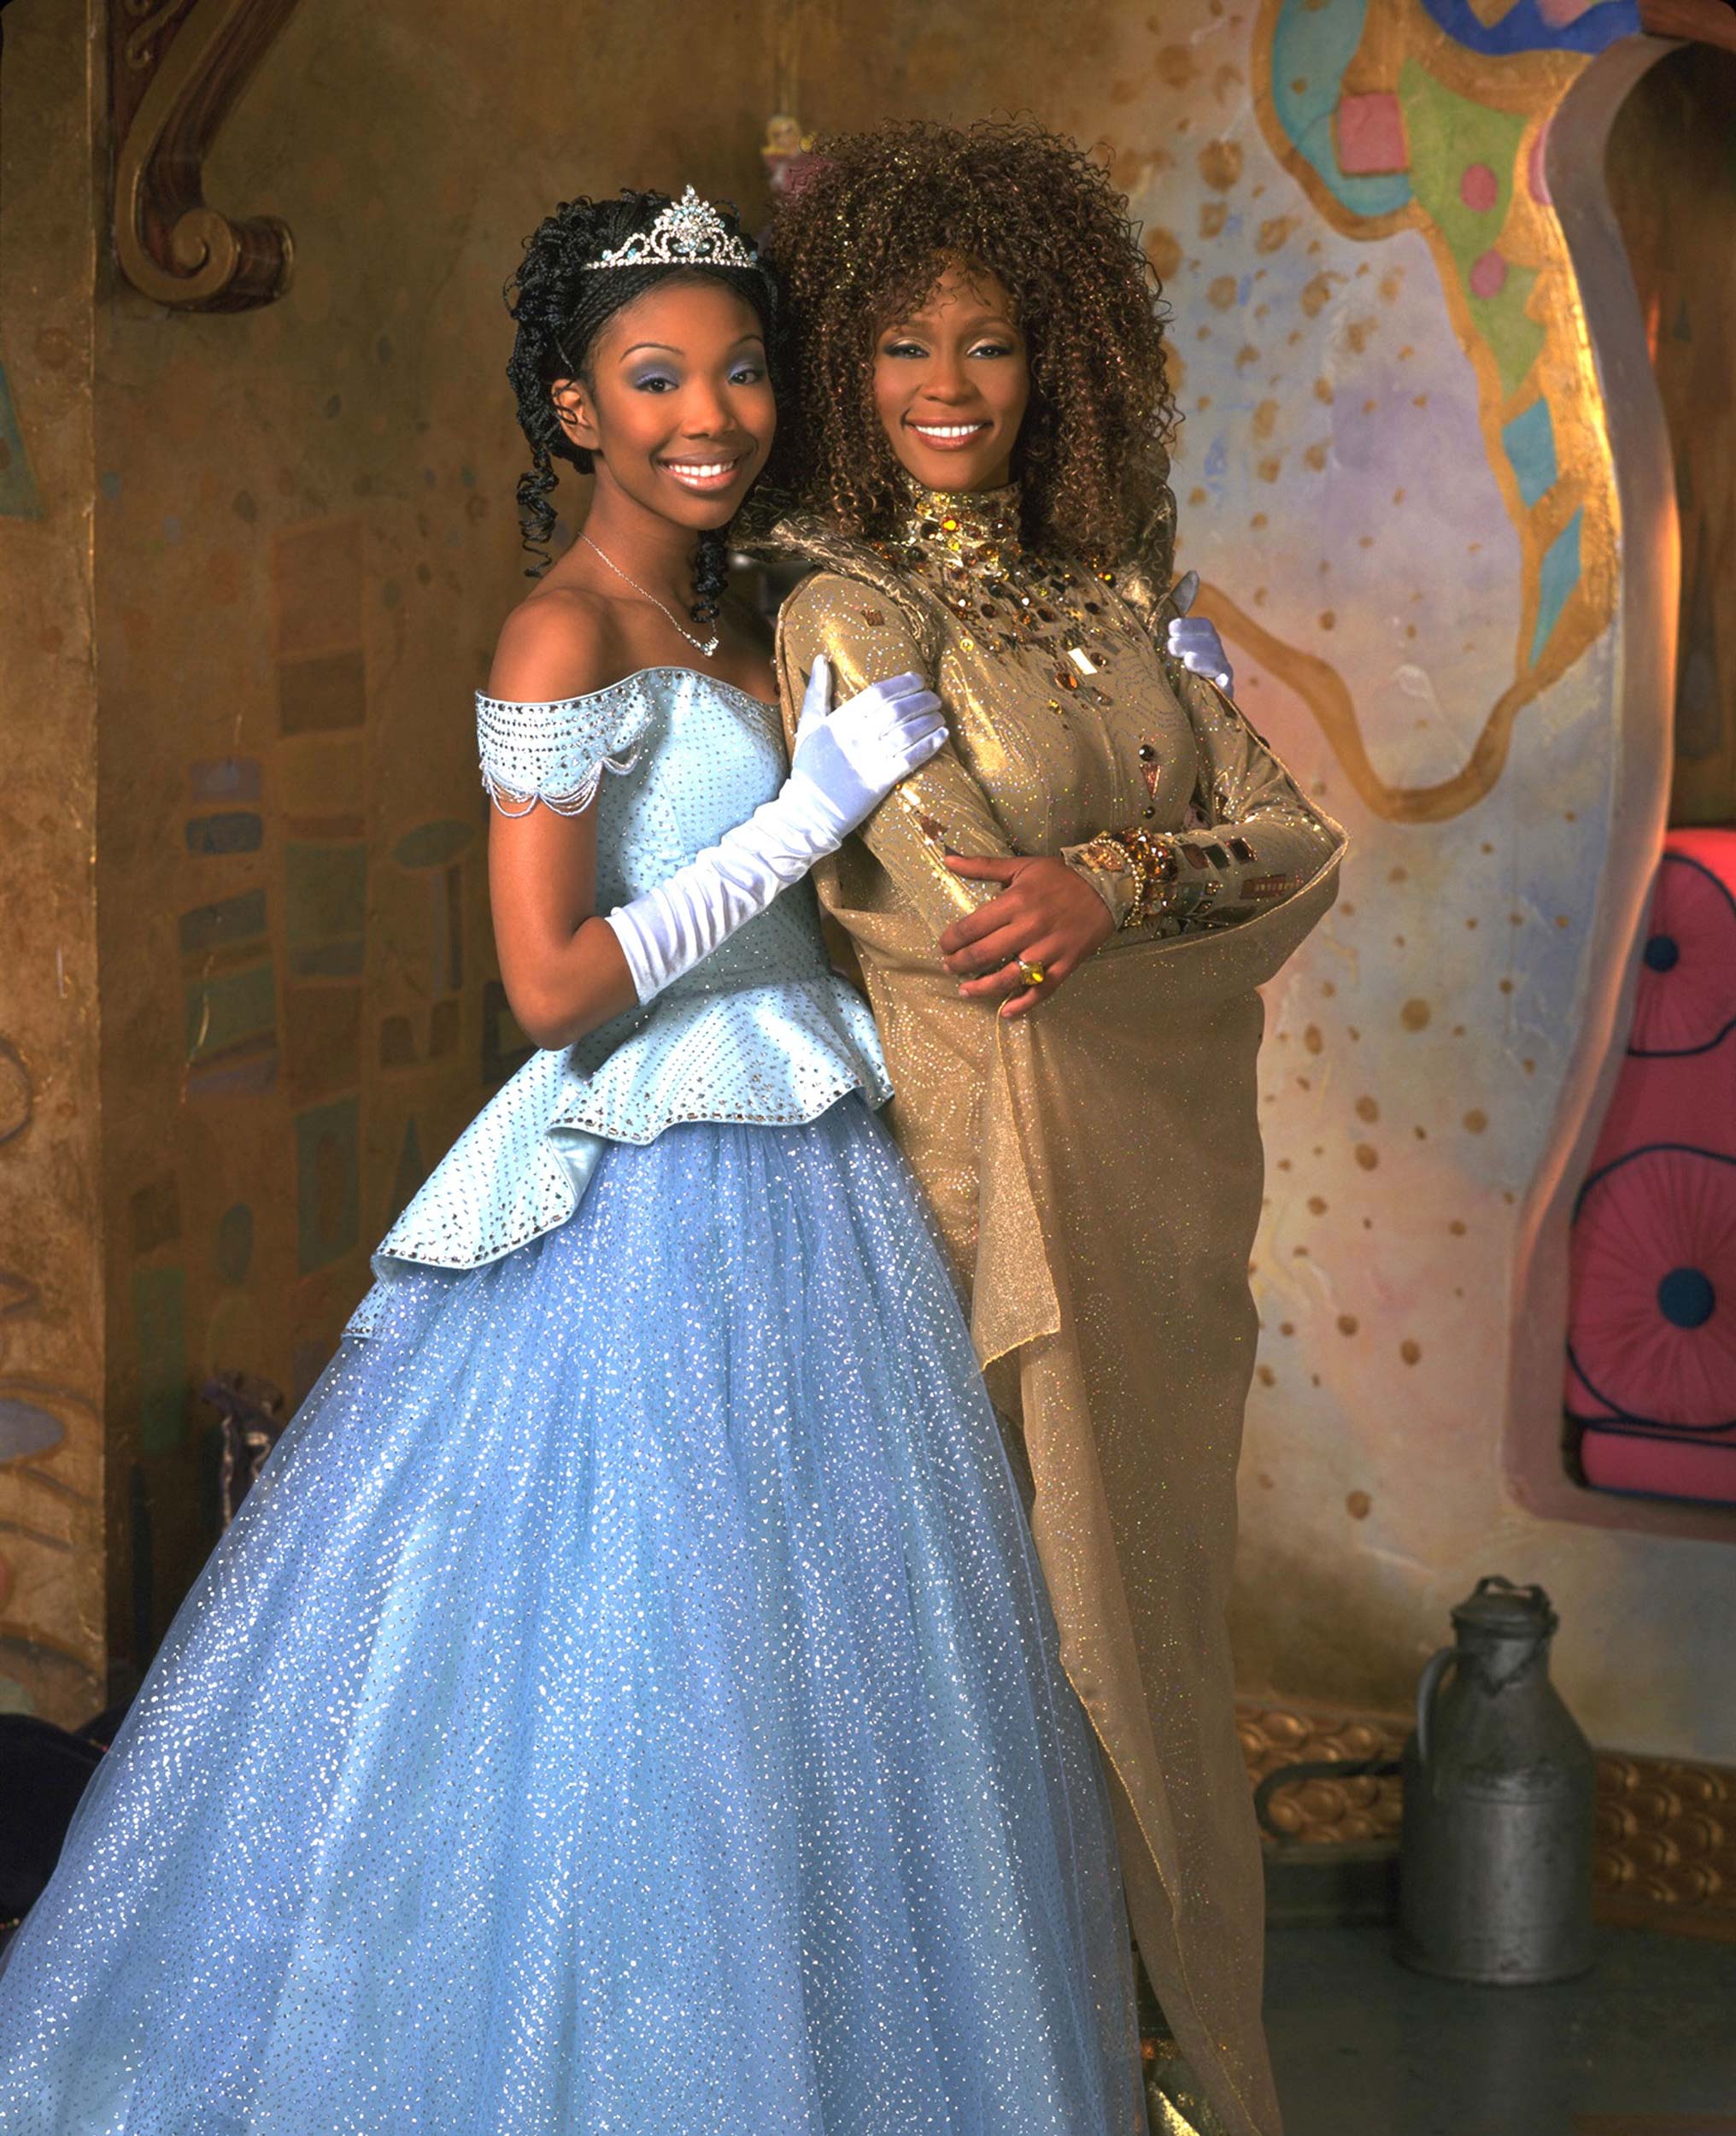 A photo from the 1997 television broadcast of Cinderella.